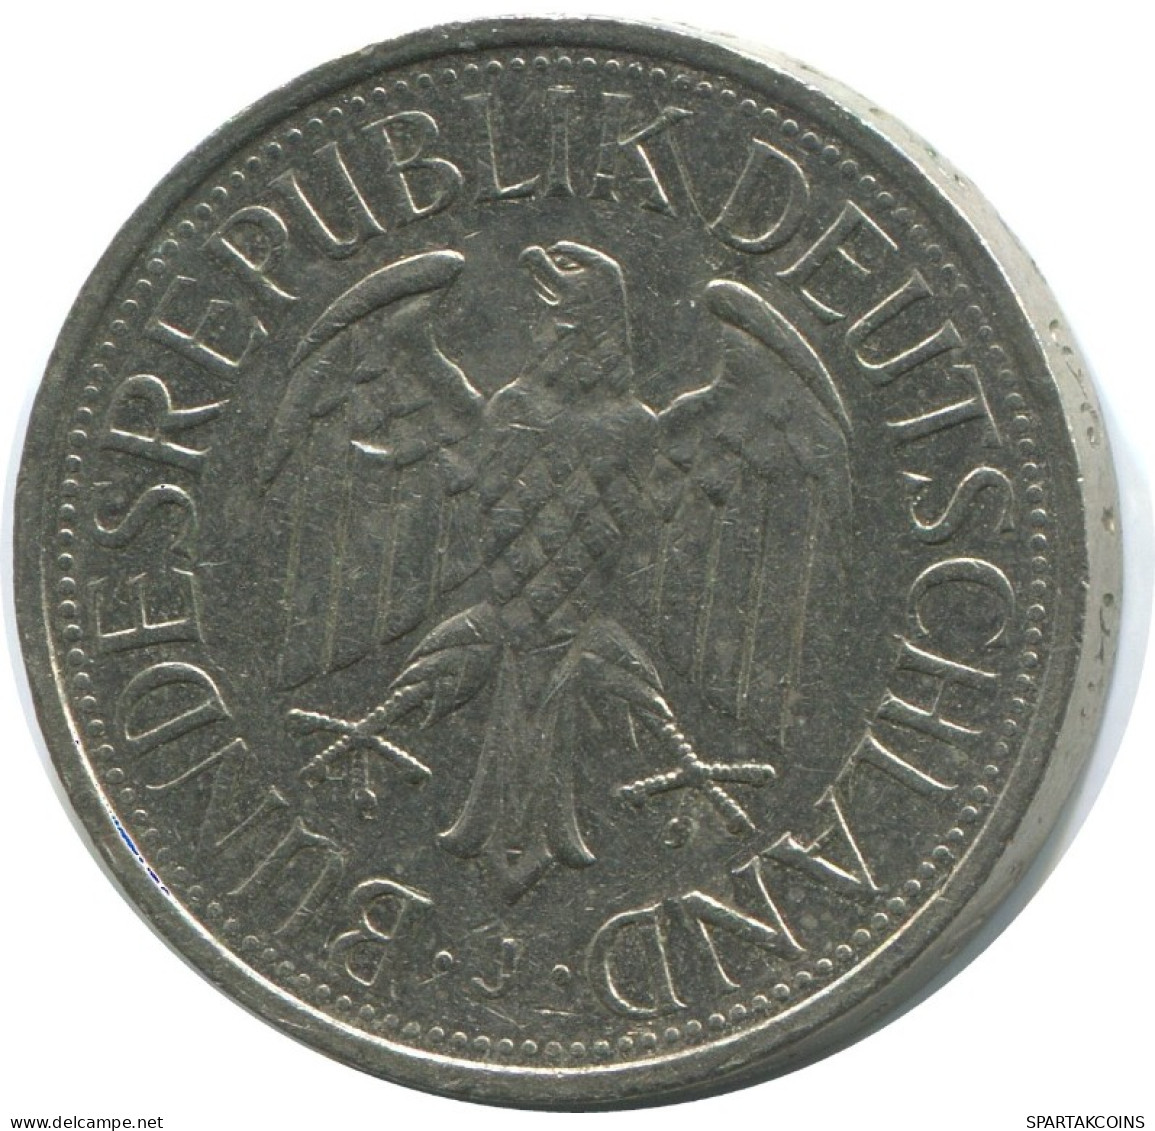 1 DM 1980 J WEST & UNIFIED GERMANY Coin #AG311.3.U.A - 1 Marco